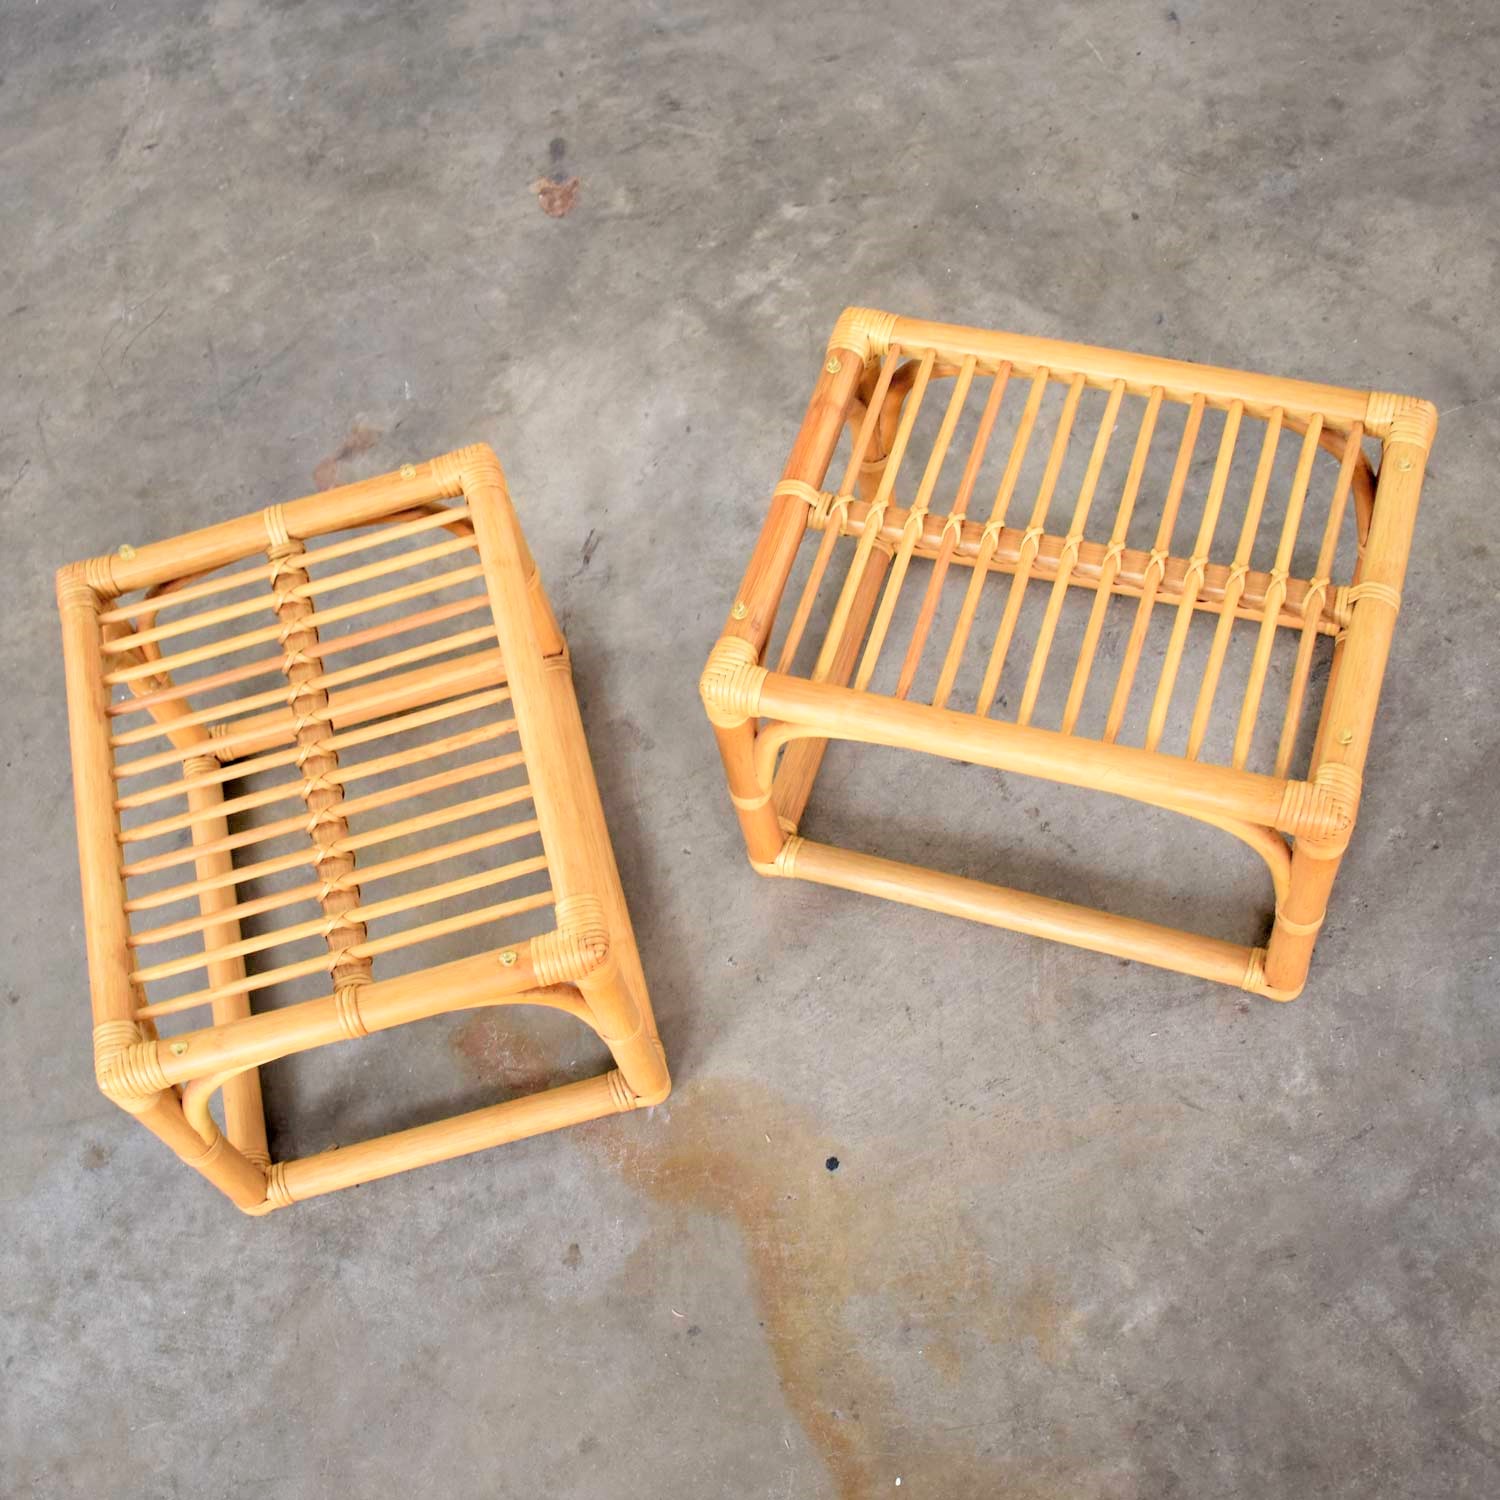 Vintage Modern Pair of Rattan Rectangular Side Tables or End Tables with Glass Top